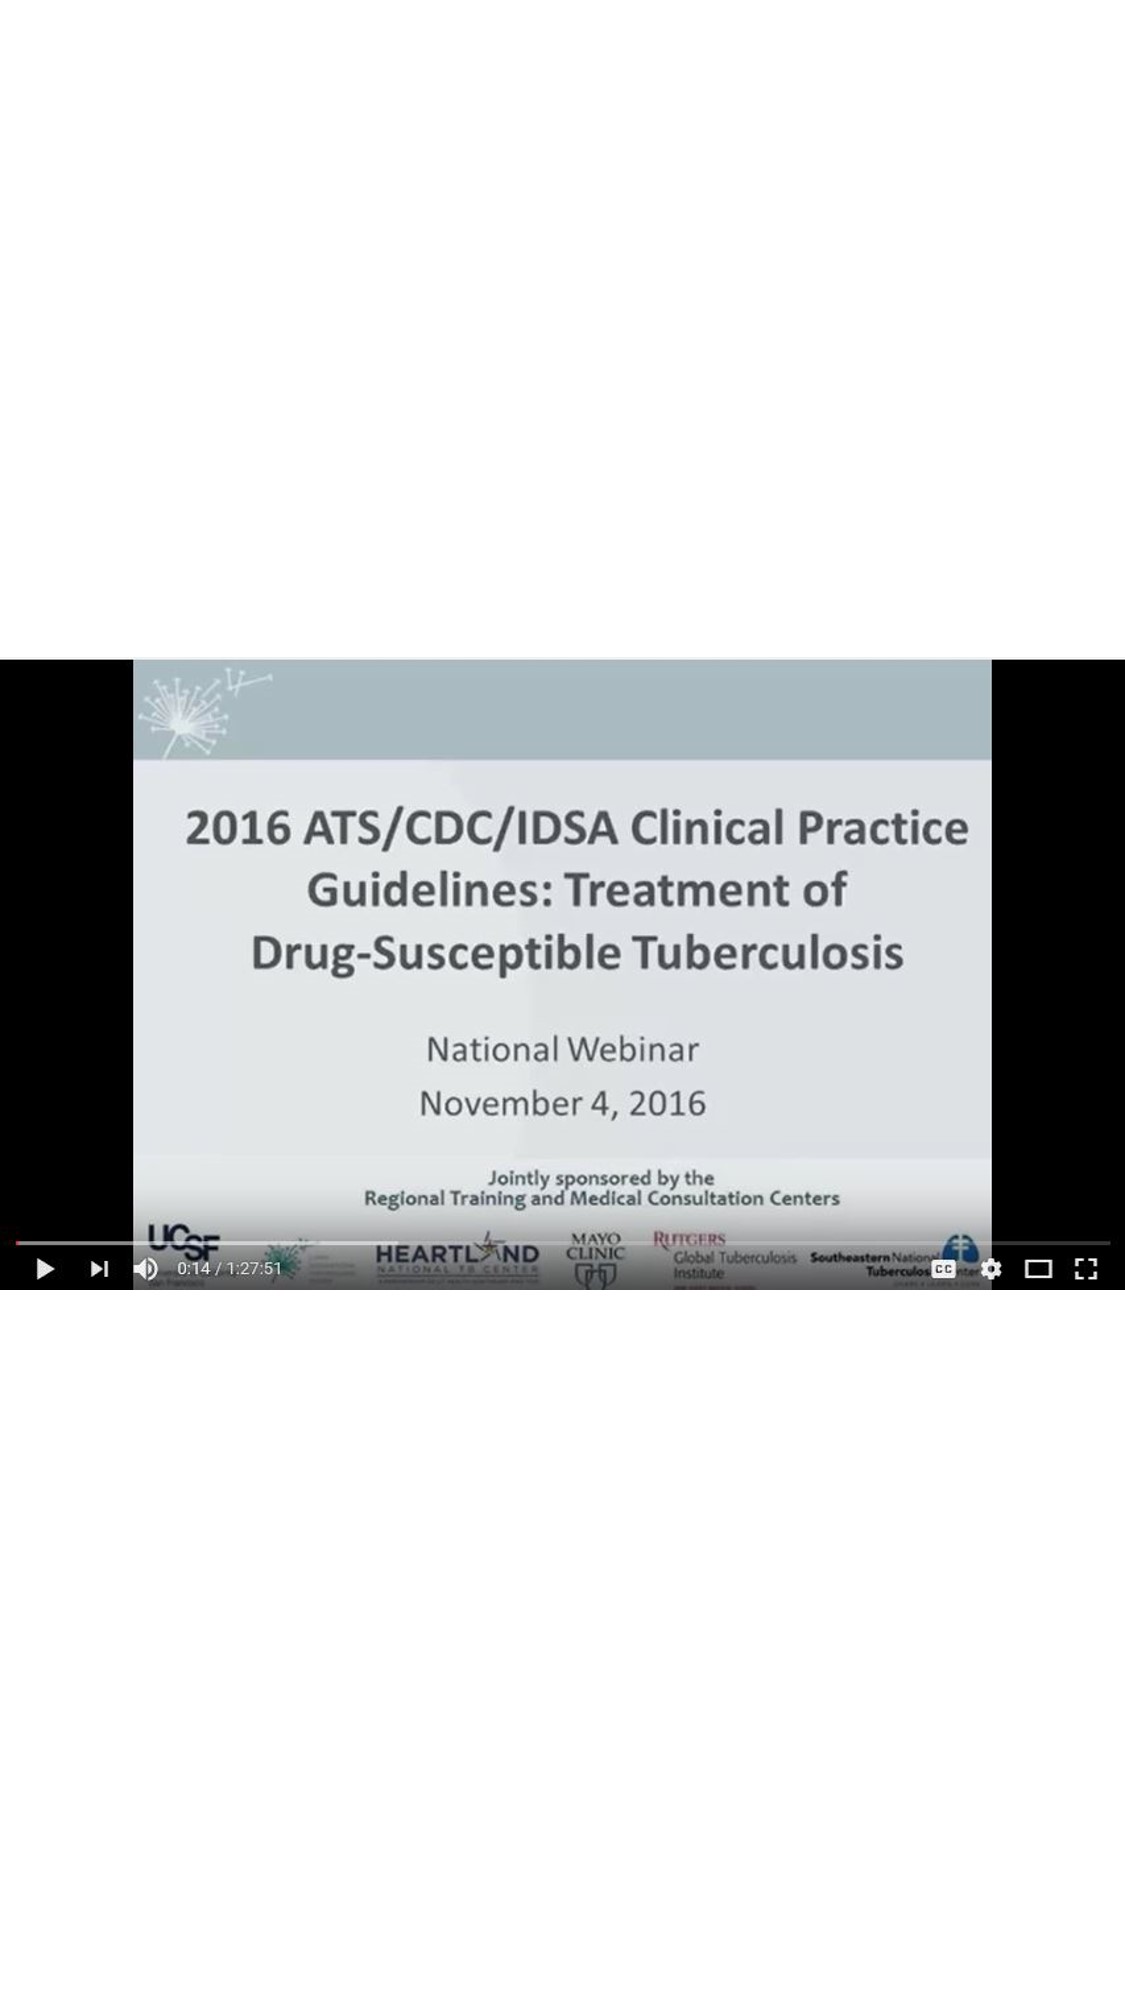 2016 ATS/CDC/IDSA Clinical Practice Guidelines: Treatment of Drug-Susceptible Tuberculosis Webinar